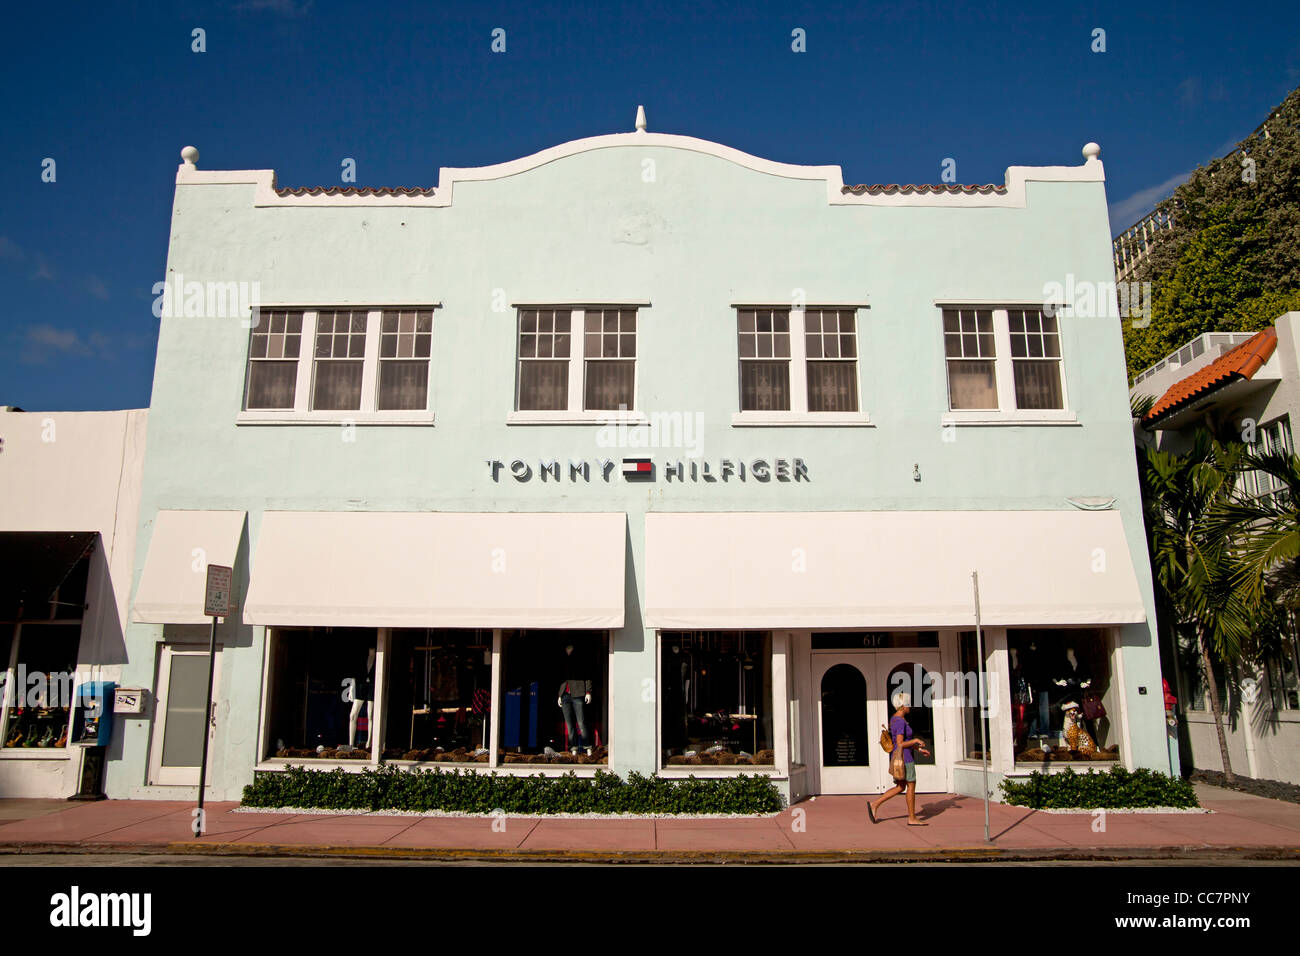 Tommy Hilfiger store in South Beach, Miami, Florida, USA Stock Photo - Alamy